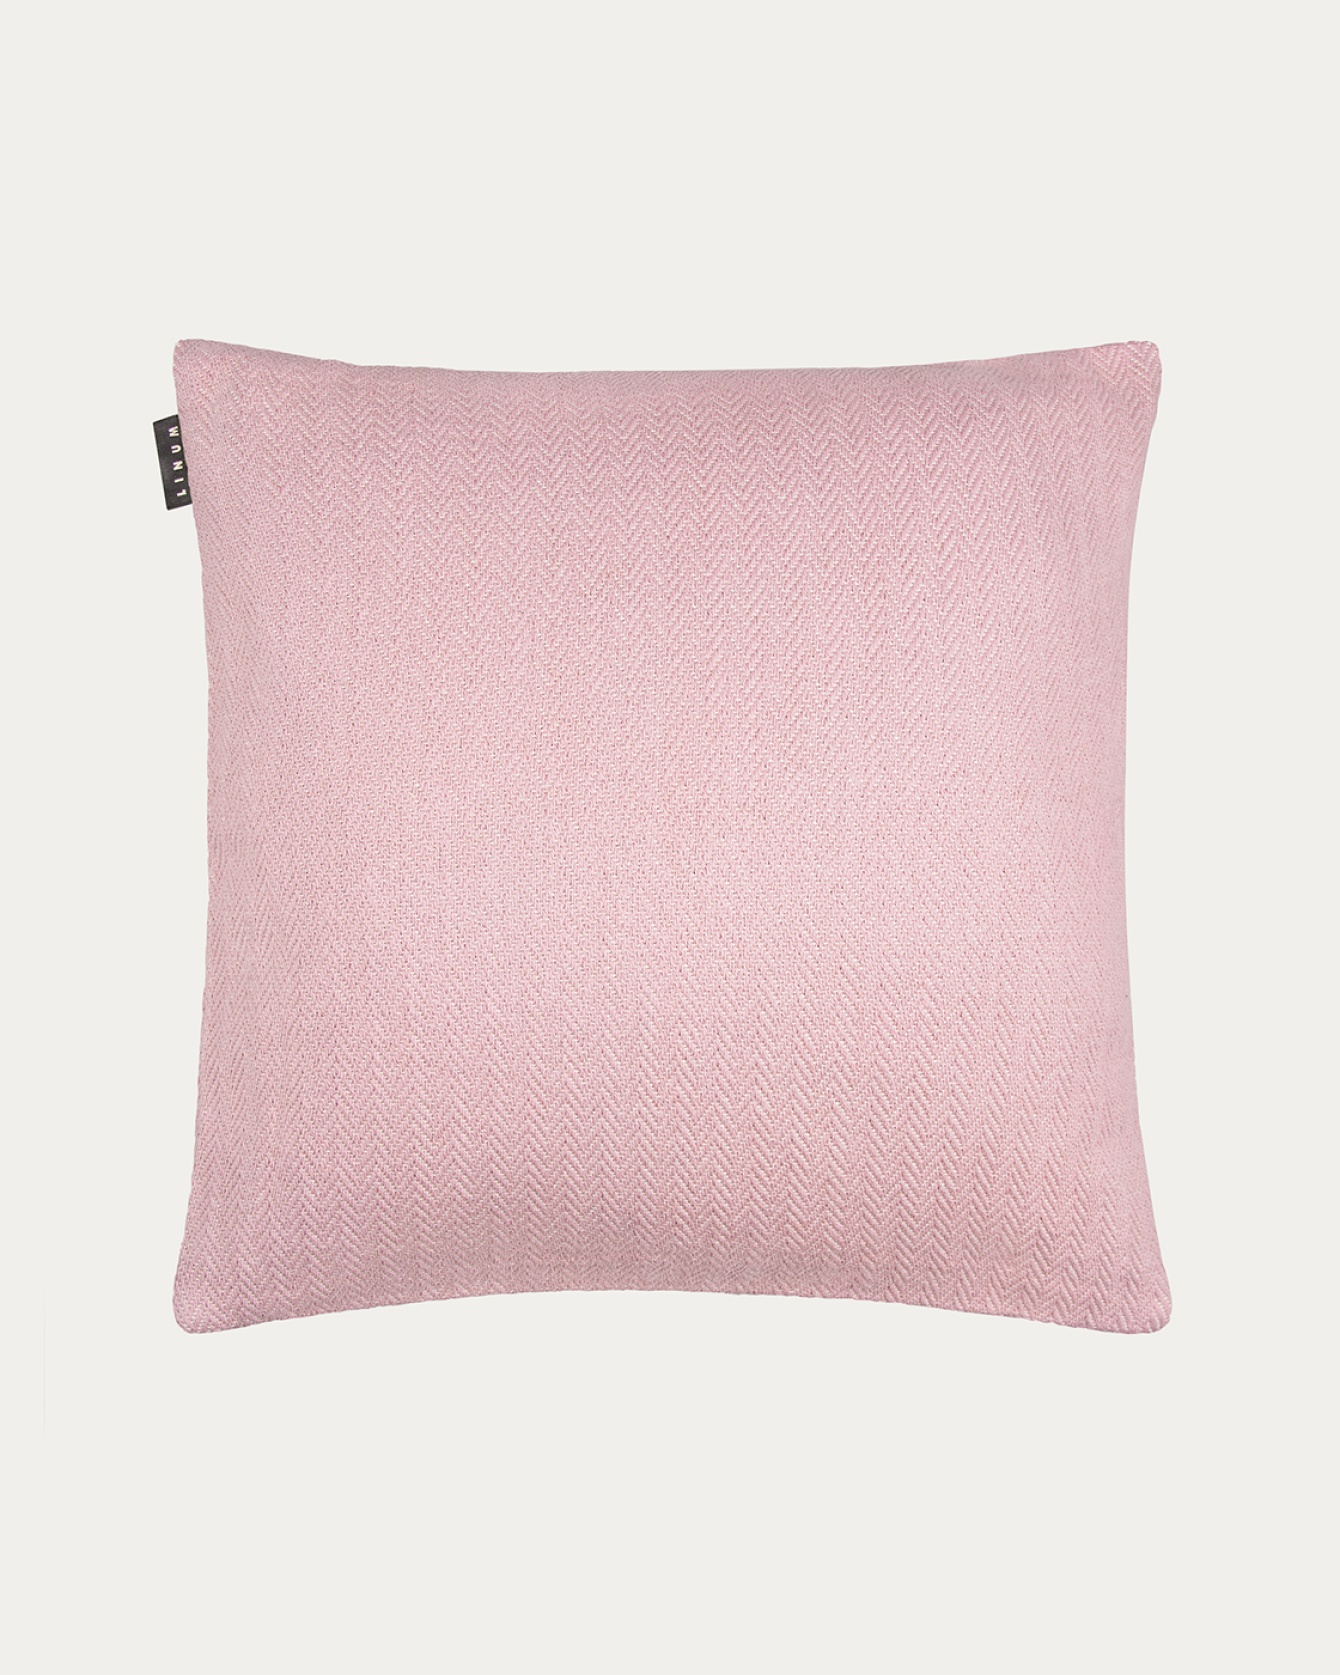 Product image dusty pink SHEPARD cushion cover made of soft cotton with a discreet herringbone pattern from LINUM DESIGN. Size 50x50 cm.